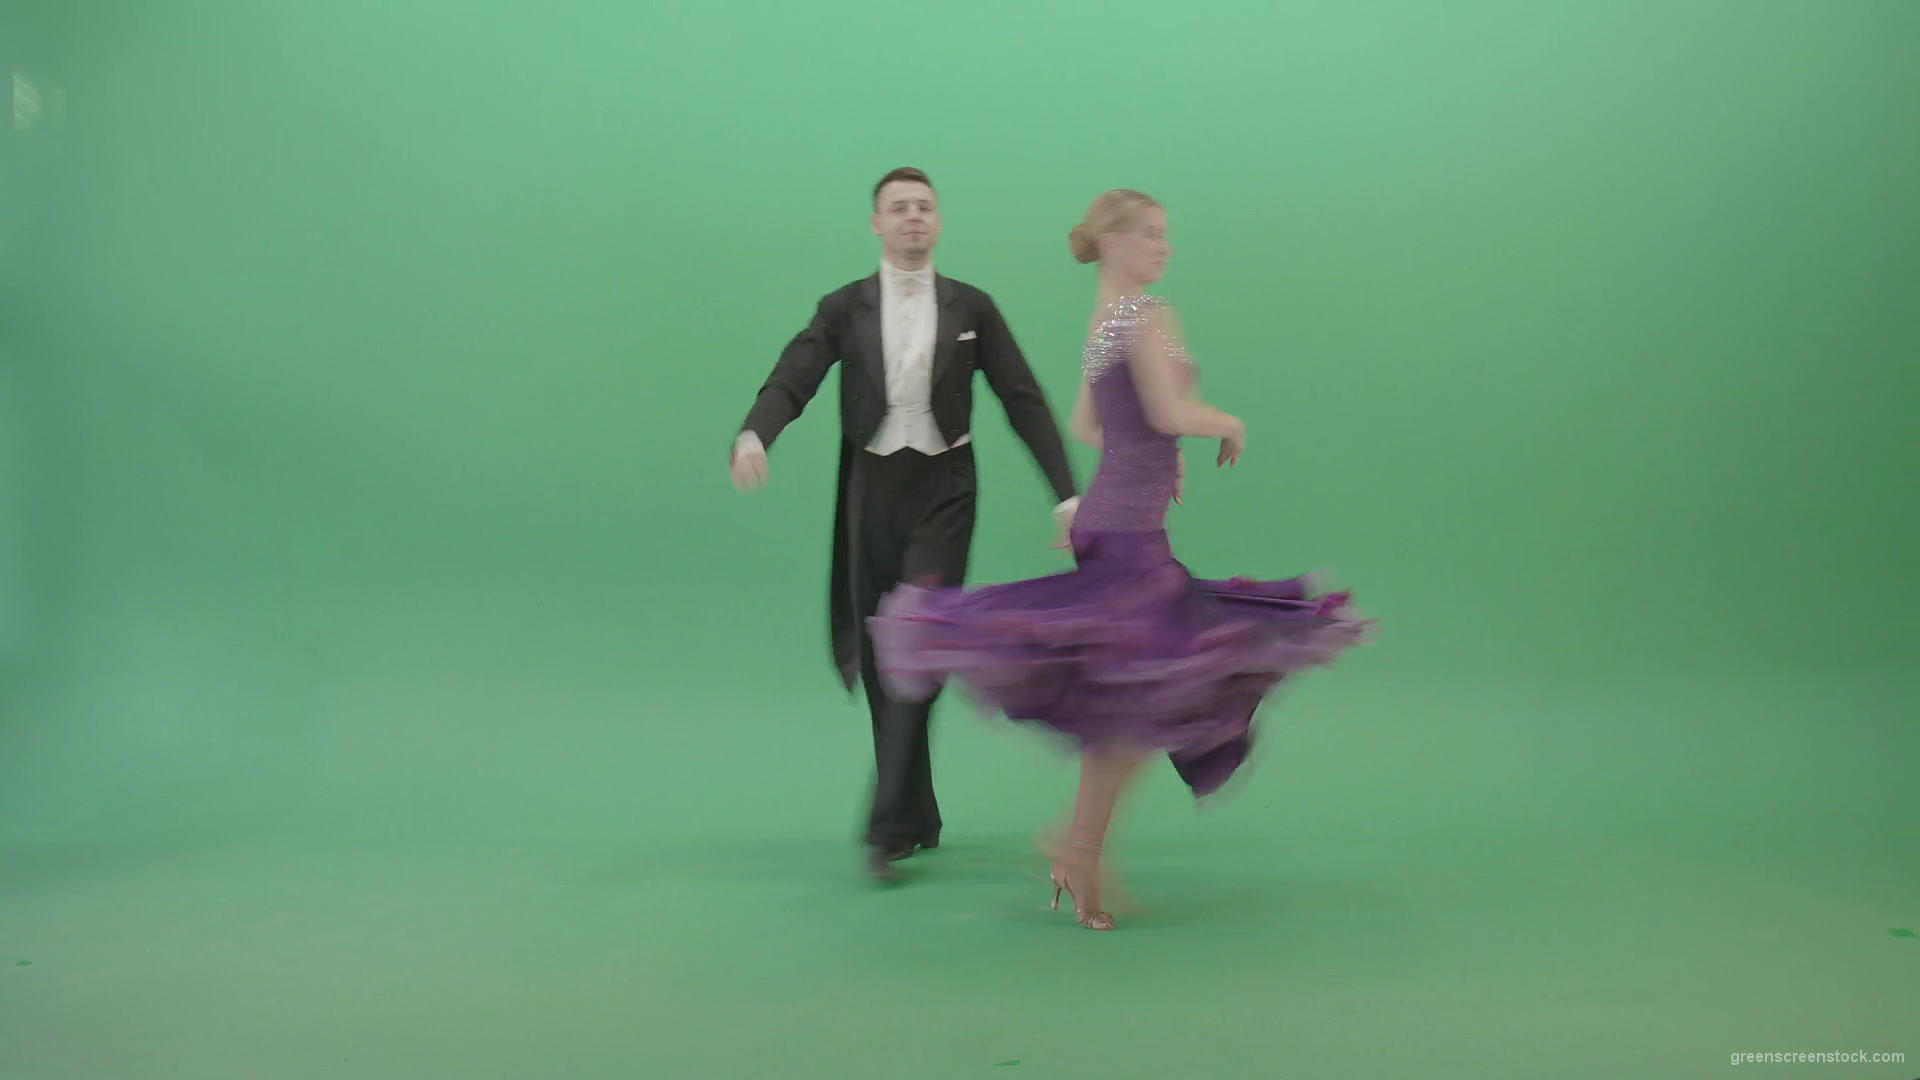 Green-Screen-Ballroom-man-and-woman-making-open-ceremony-reverence-4K-Video-Footage-1920_005 Green Screen Stock